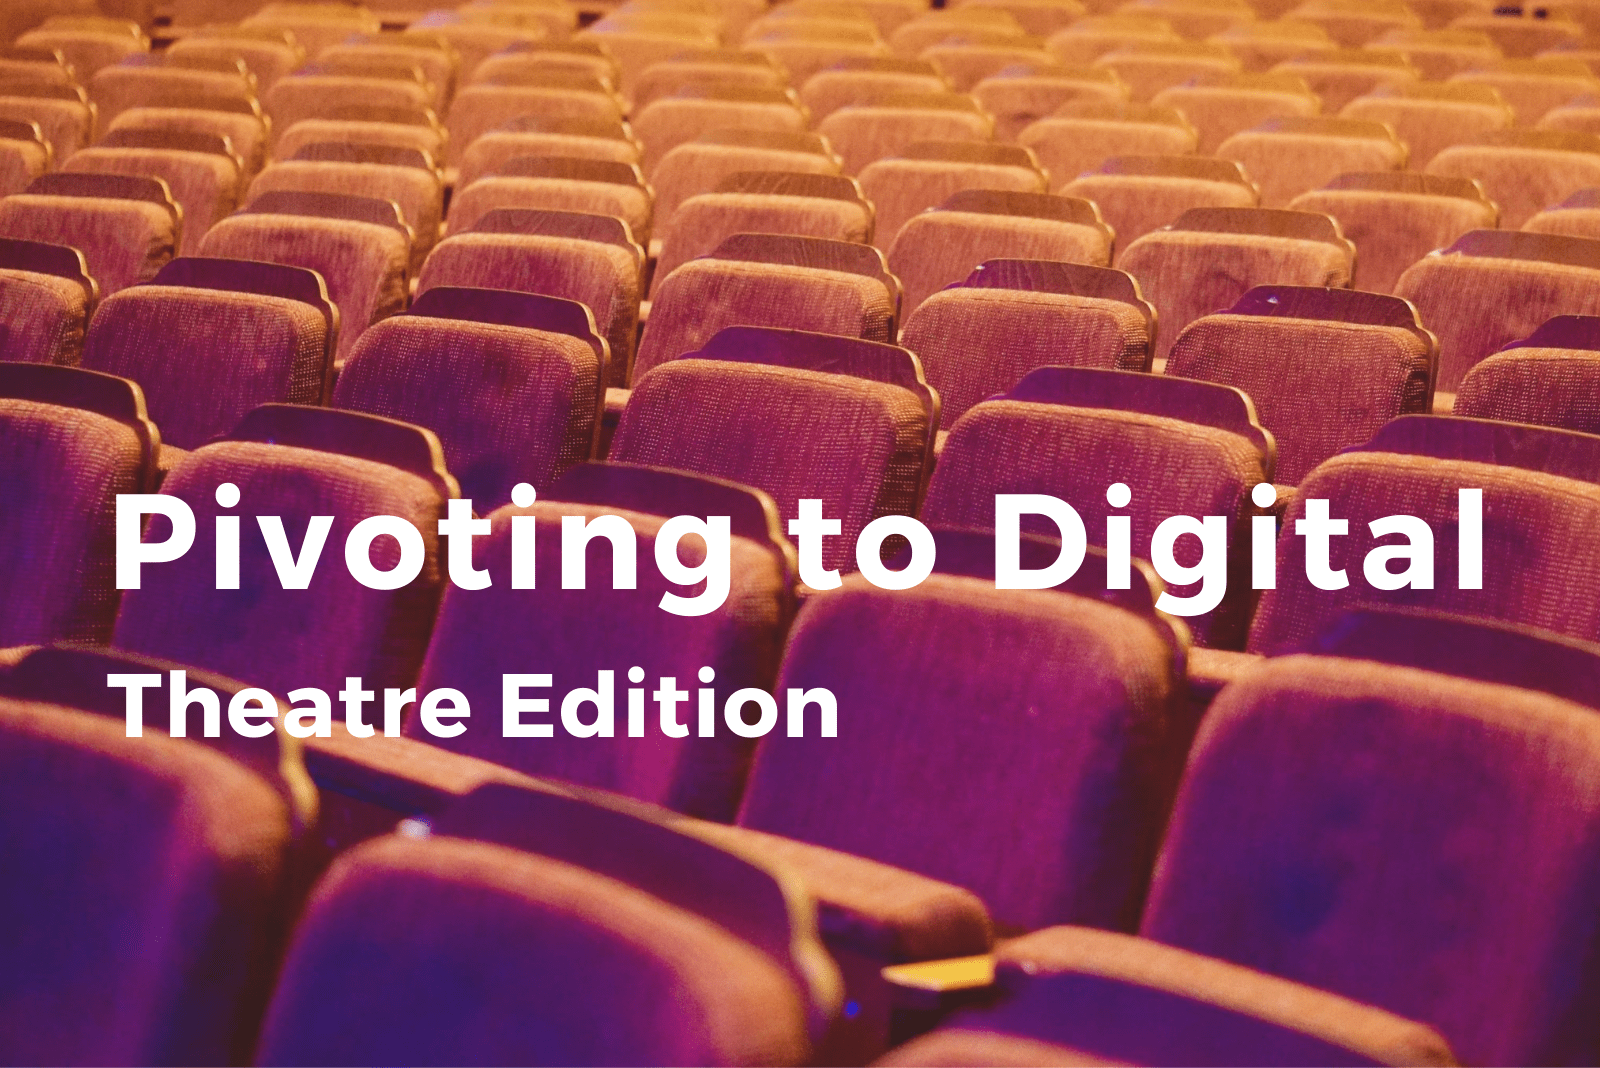 Pivoting to Digital: Theatre Edition. White text over an image of red theatre seating.